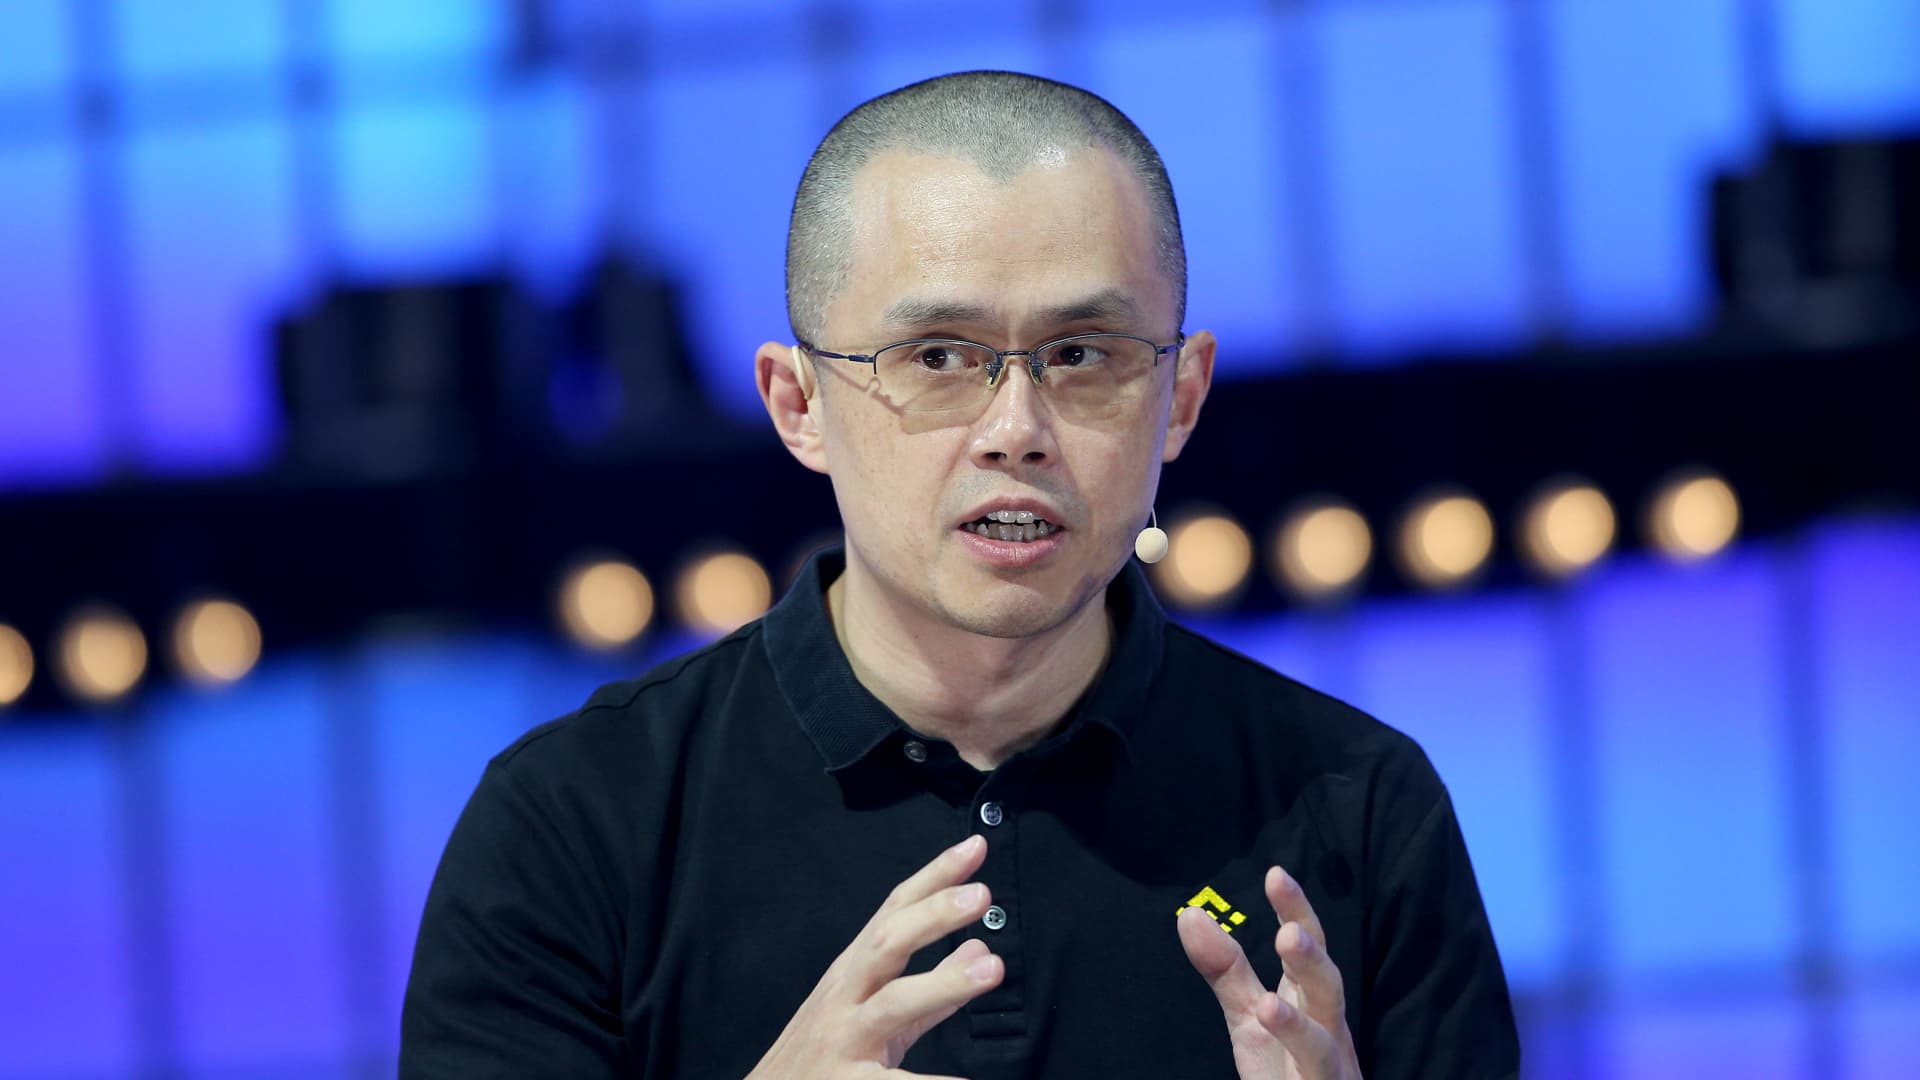 Binance U.S. clients have $2.2 billion ‘at significant risk’ after crypto exchange charged, SEC says